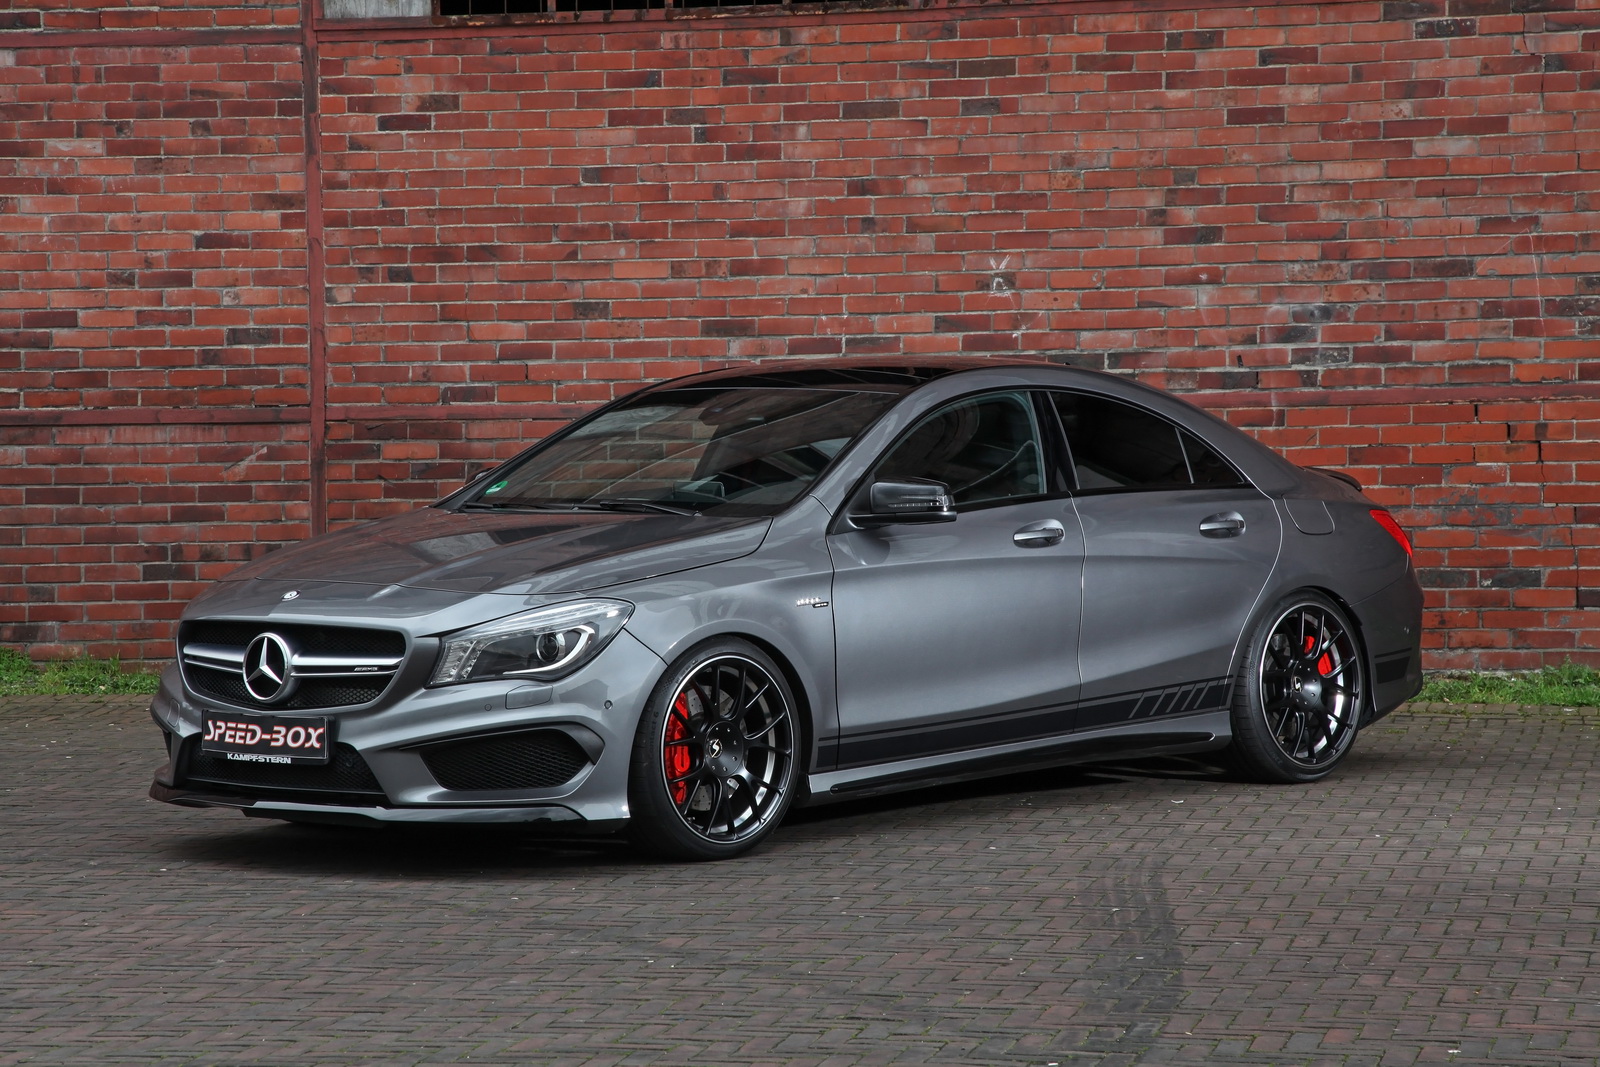 Facelifted MercedesAMG CLA 45 Gets Horsepower Injection